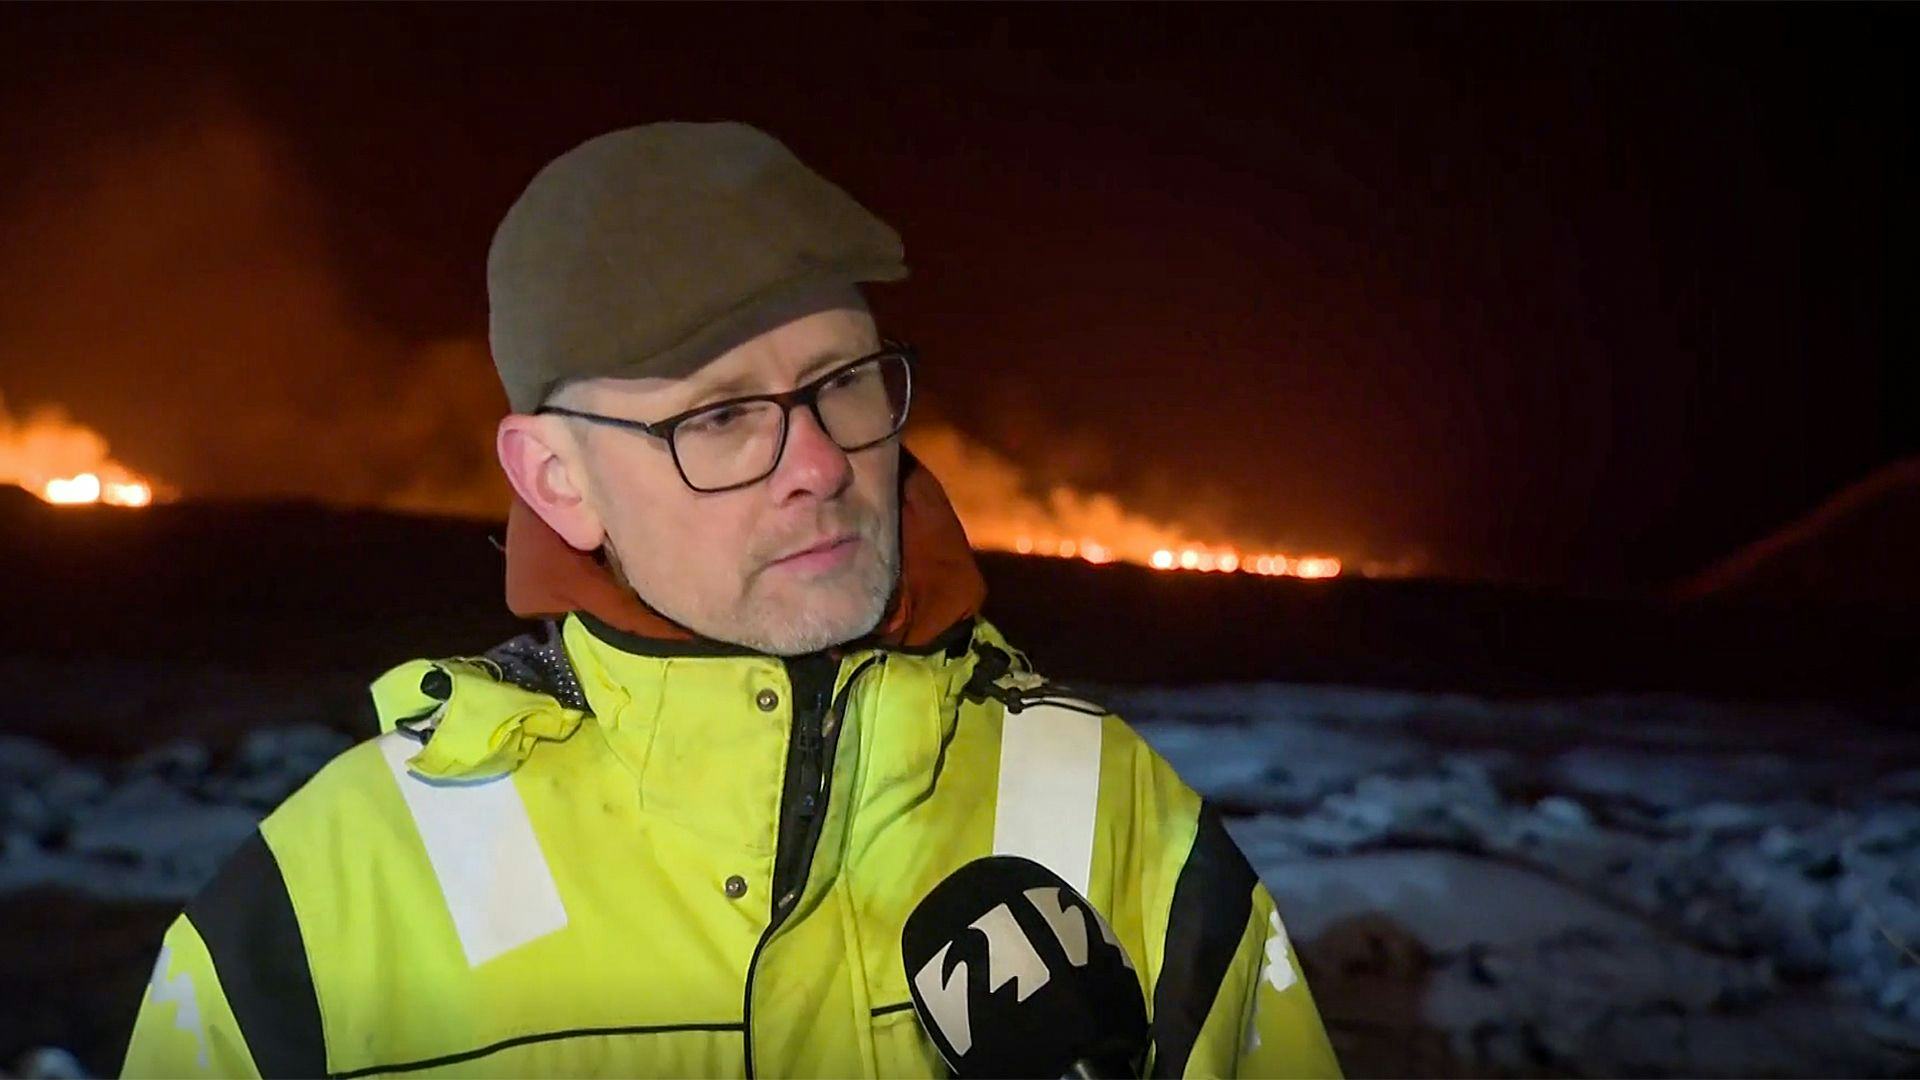 A man in high visibility jacket in the foreground with a dramatic background of what appears to be a fire or blaze in the night